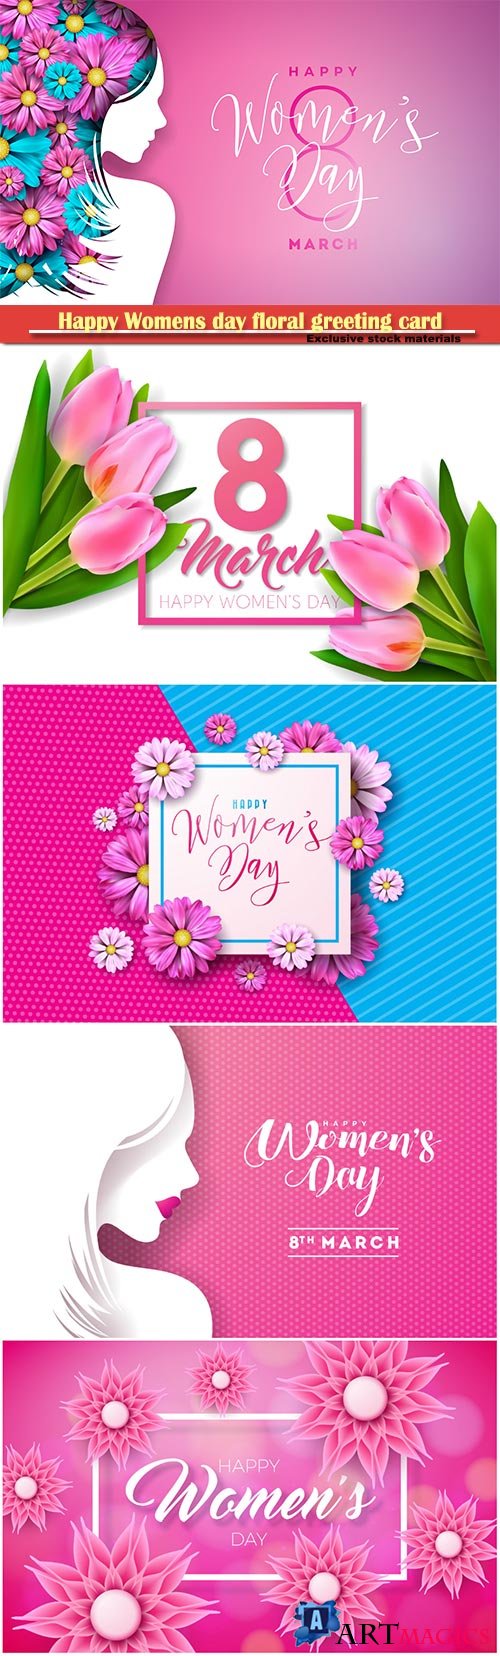 Happy Womens day floral greeting card, international female holiday Illustration, 8 March